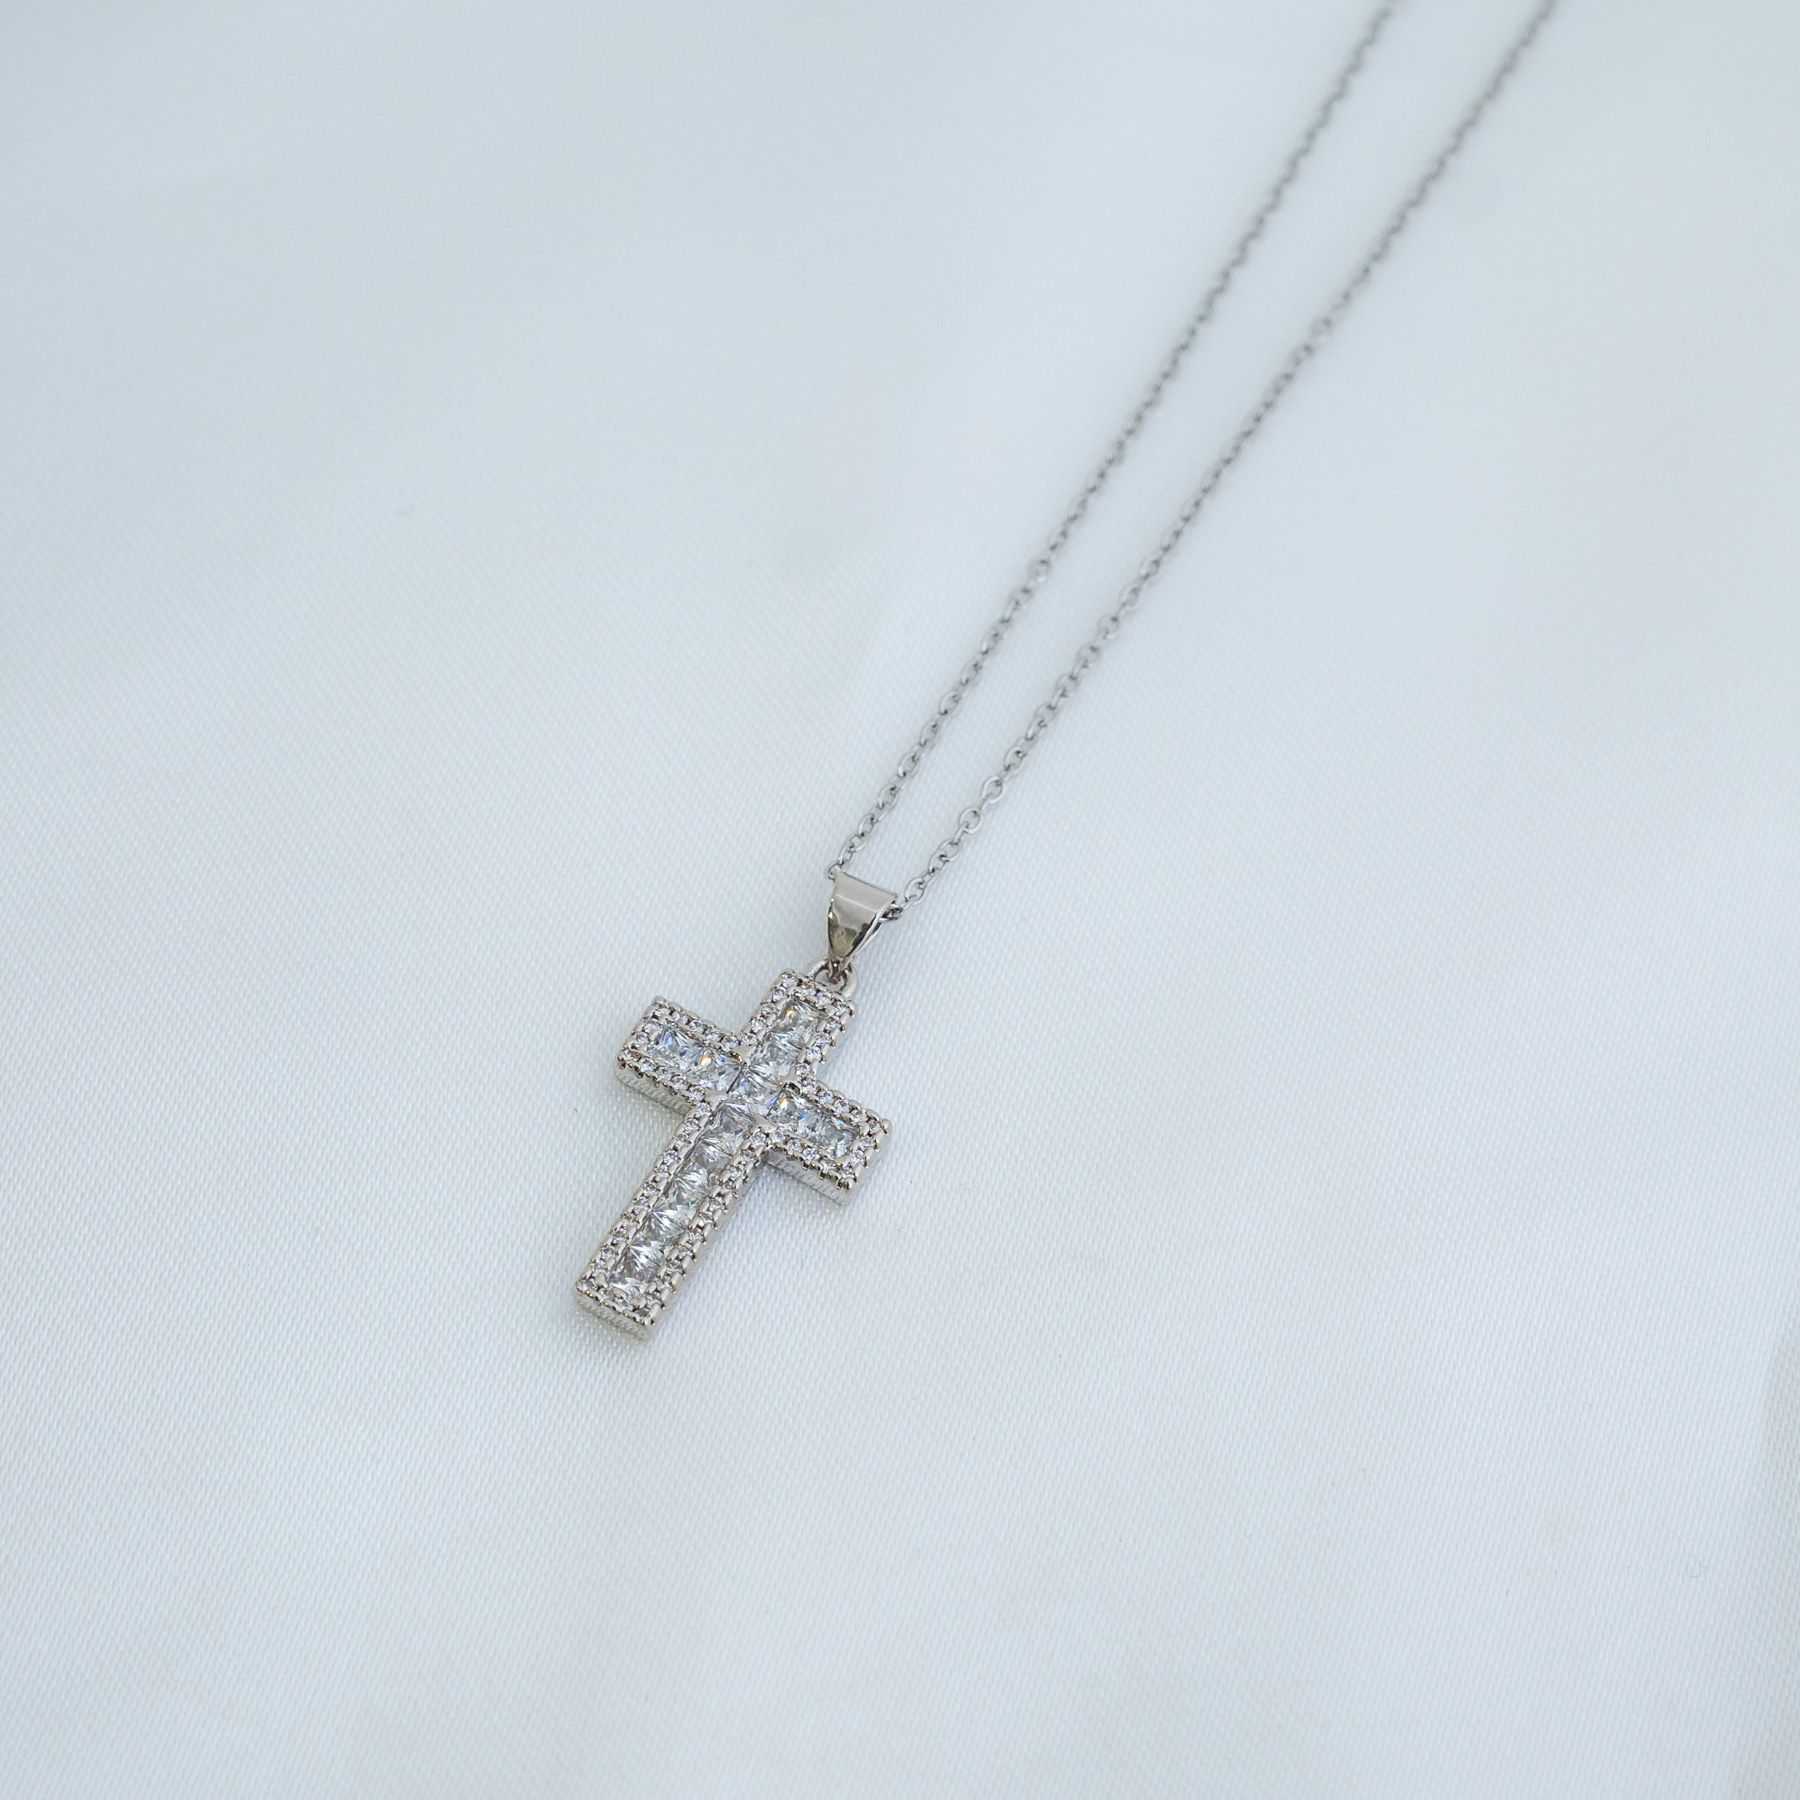 CROSS NECKLACE - SILVER 